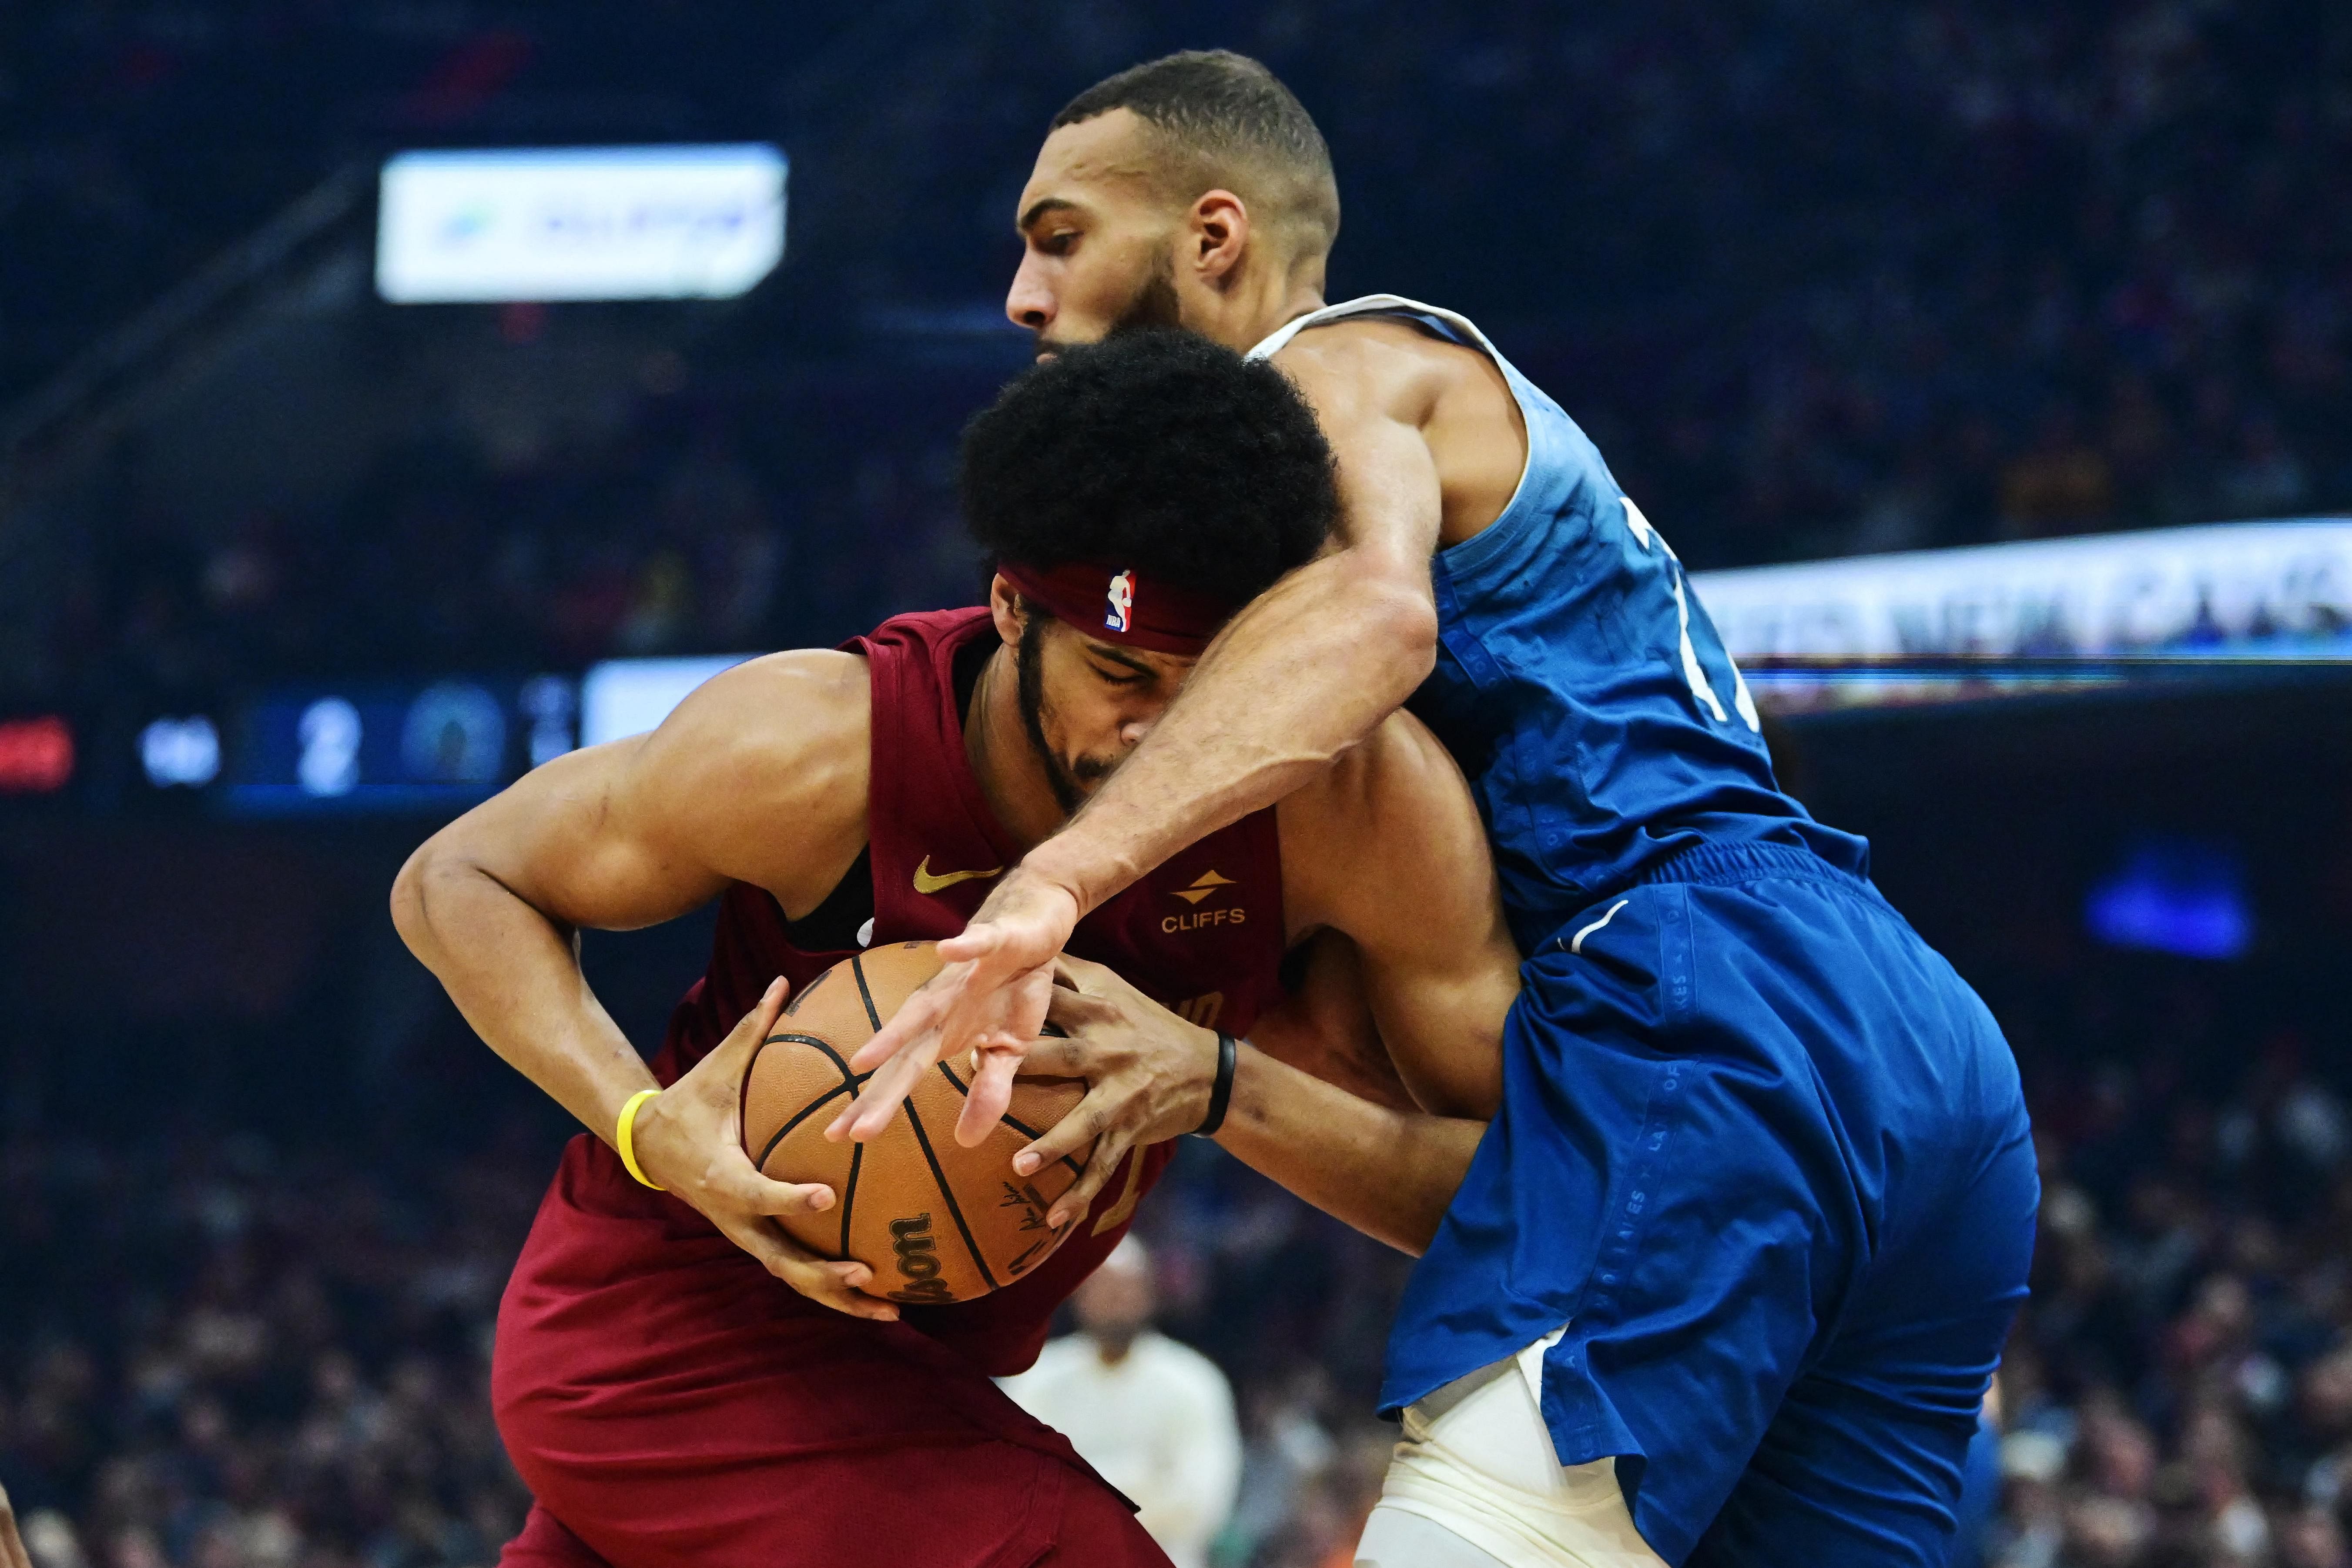 Cleveland Cavaliers hold off Minnesota Timberwolves in overtime